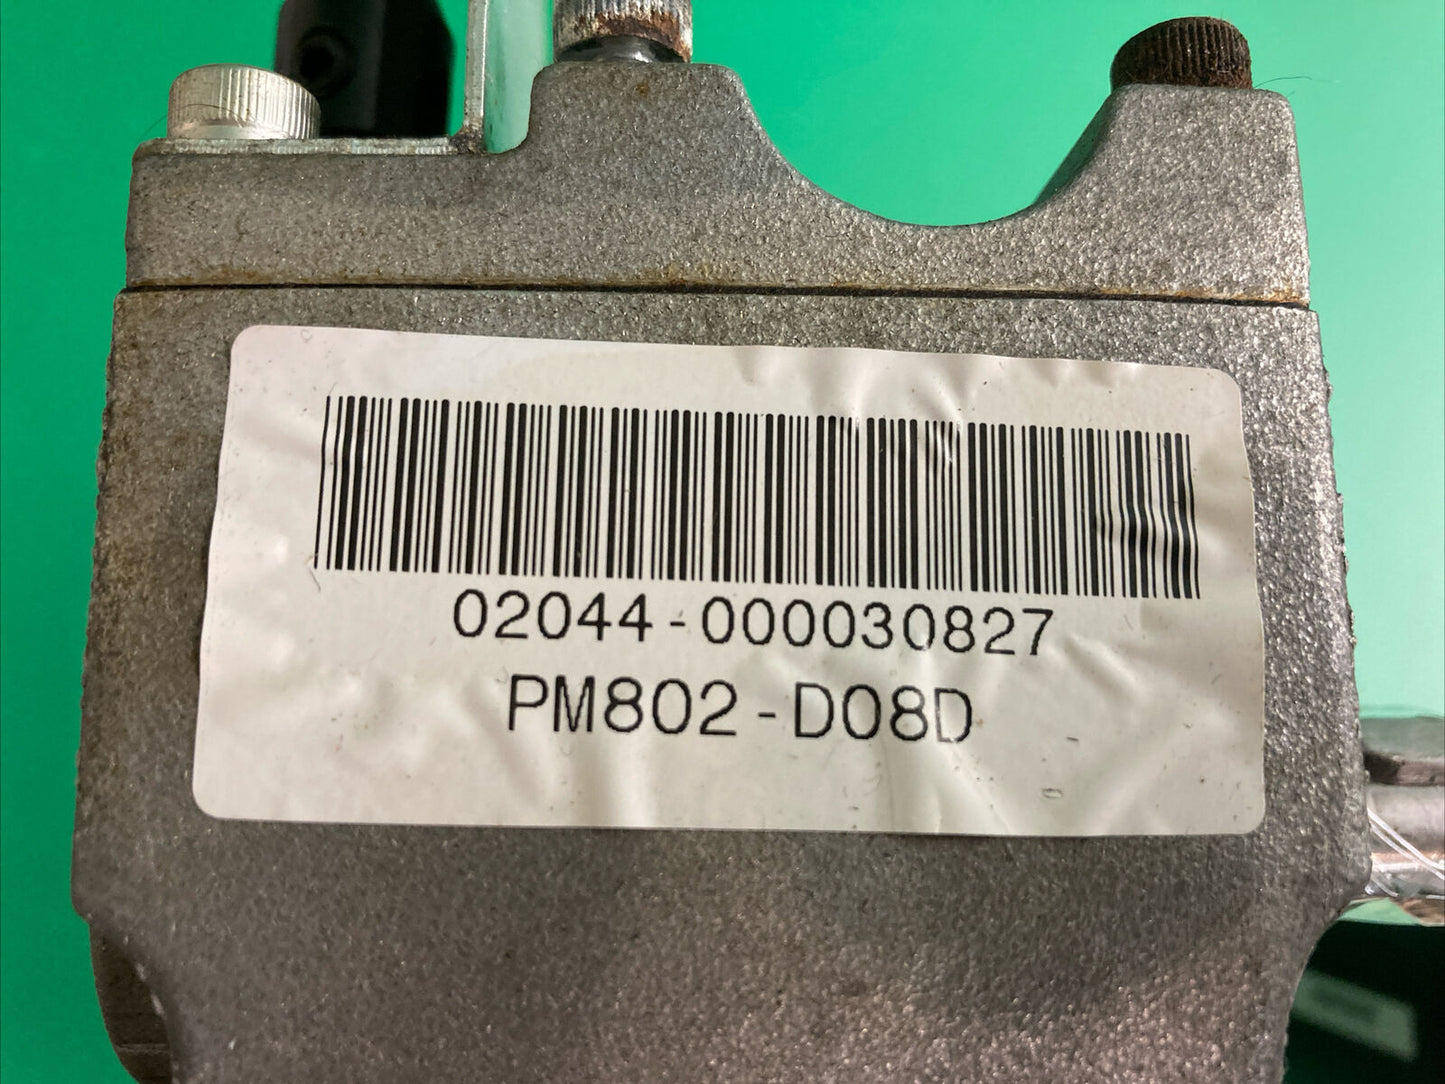 Motors for Scooter Store TSS 450 Power Wheelchair PM802-D08D-PM802-D08C #i961